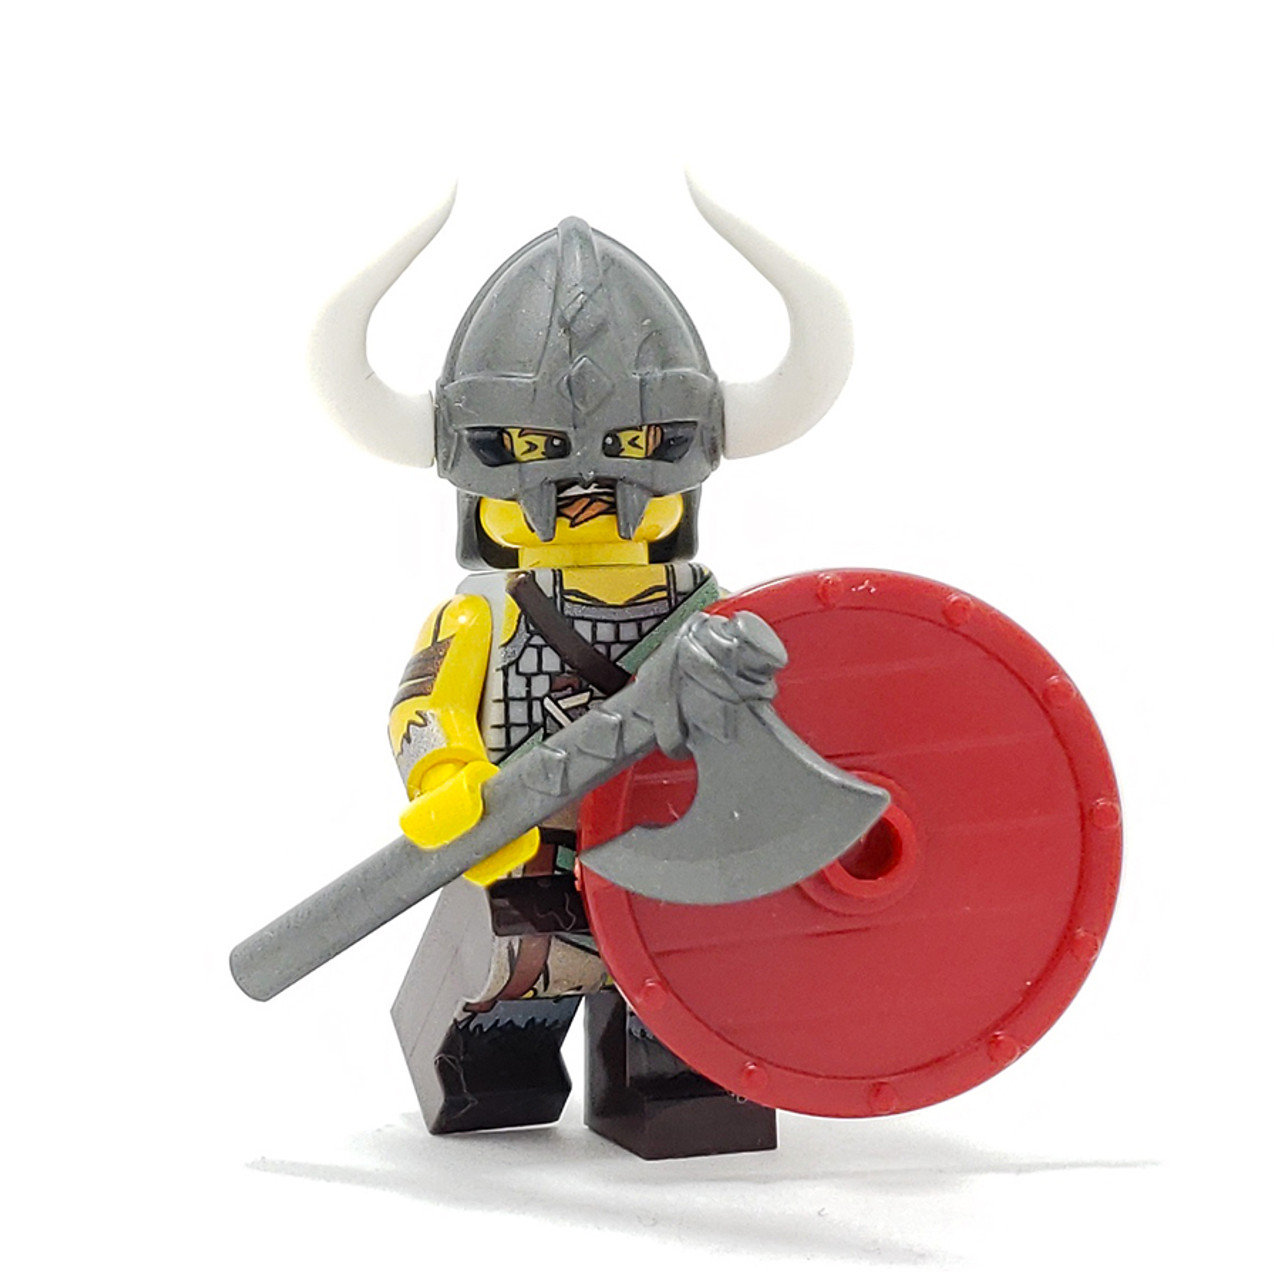 LEGO CASTLE VIKINGS CLAN VIKING SOLDIER MINIFIGURE MADE OF GENUINE LEGO PARTS 